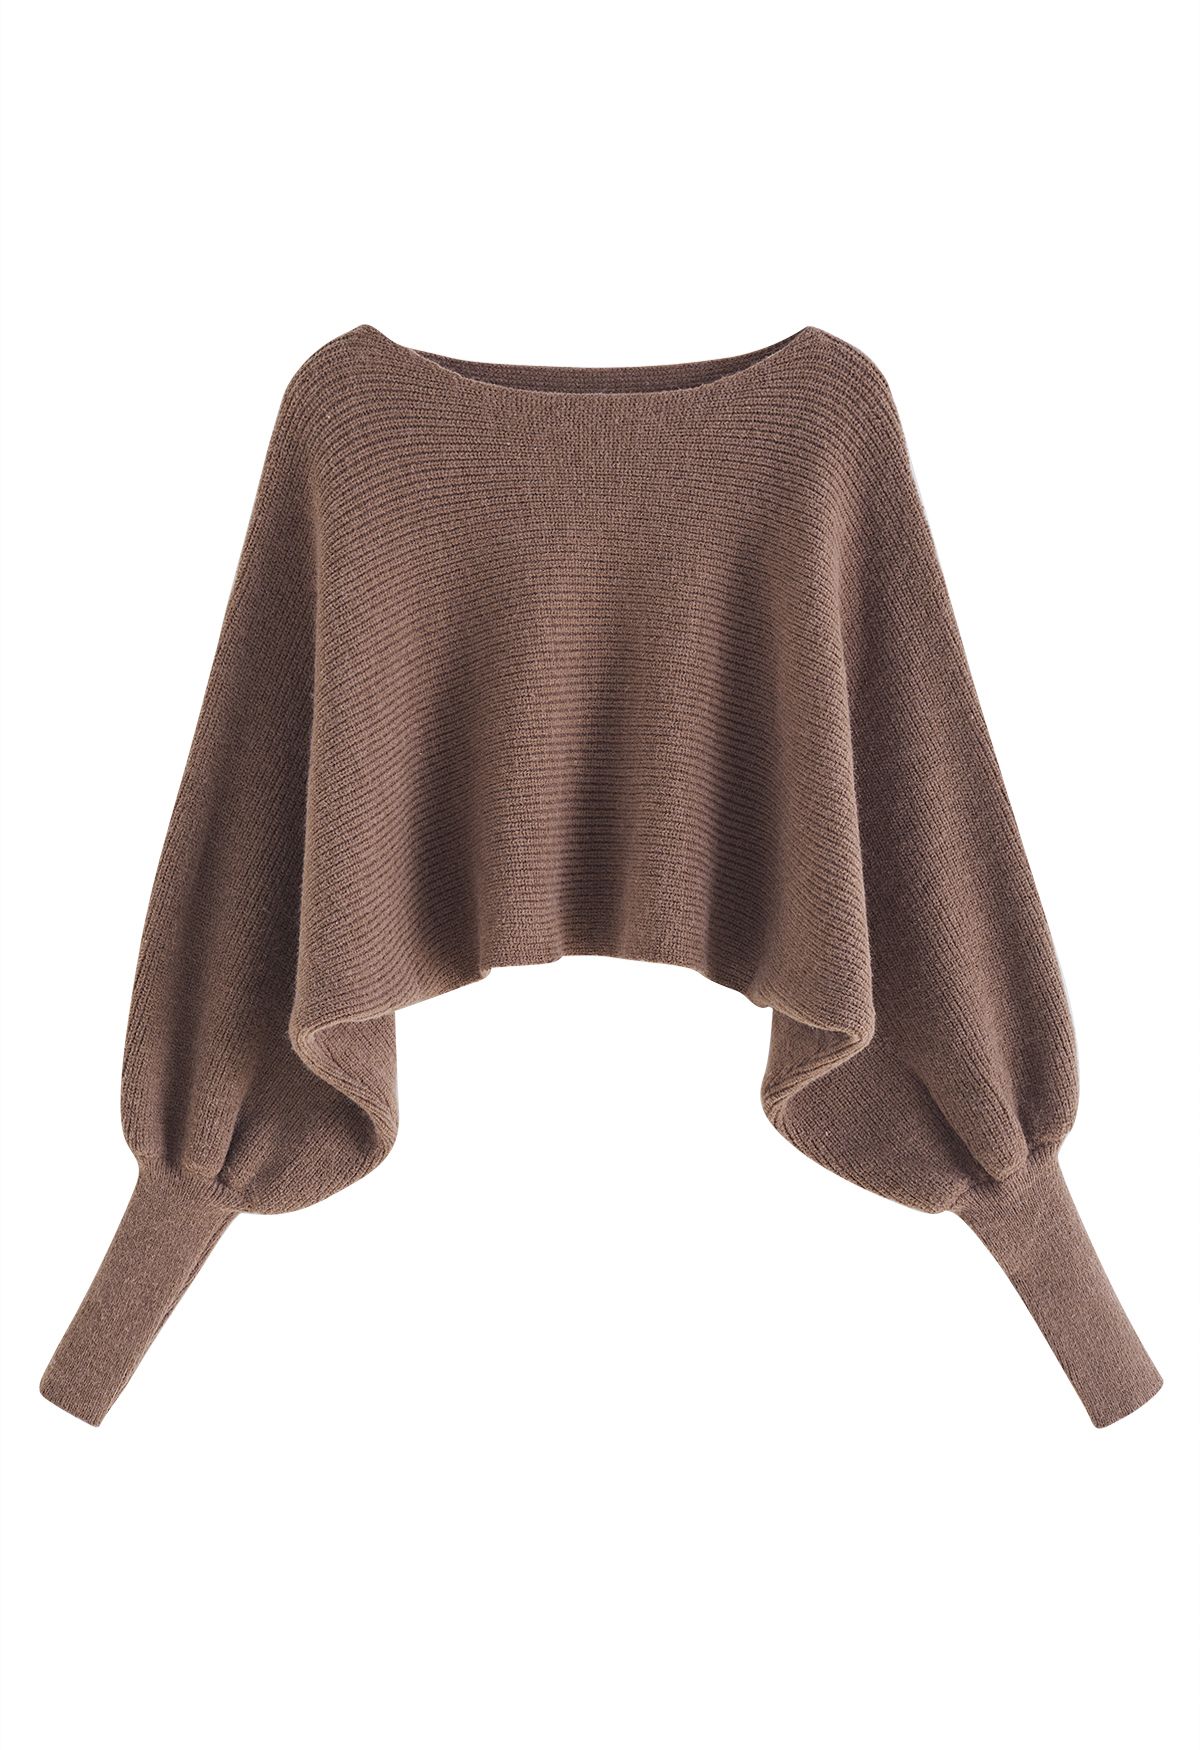 Exaggerated Bubble Sleeve Boat Neck Knit Top in Brown